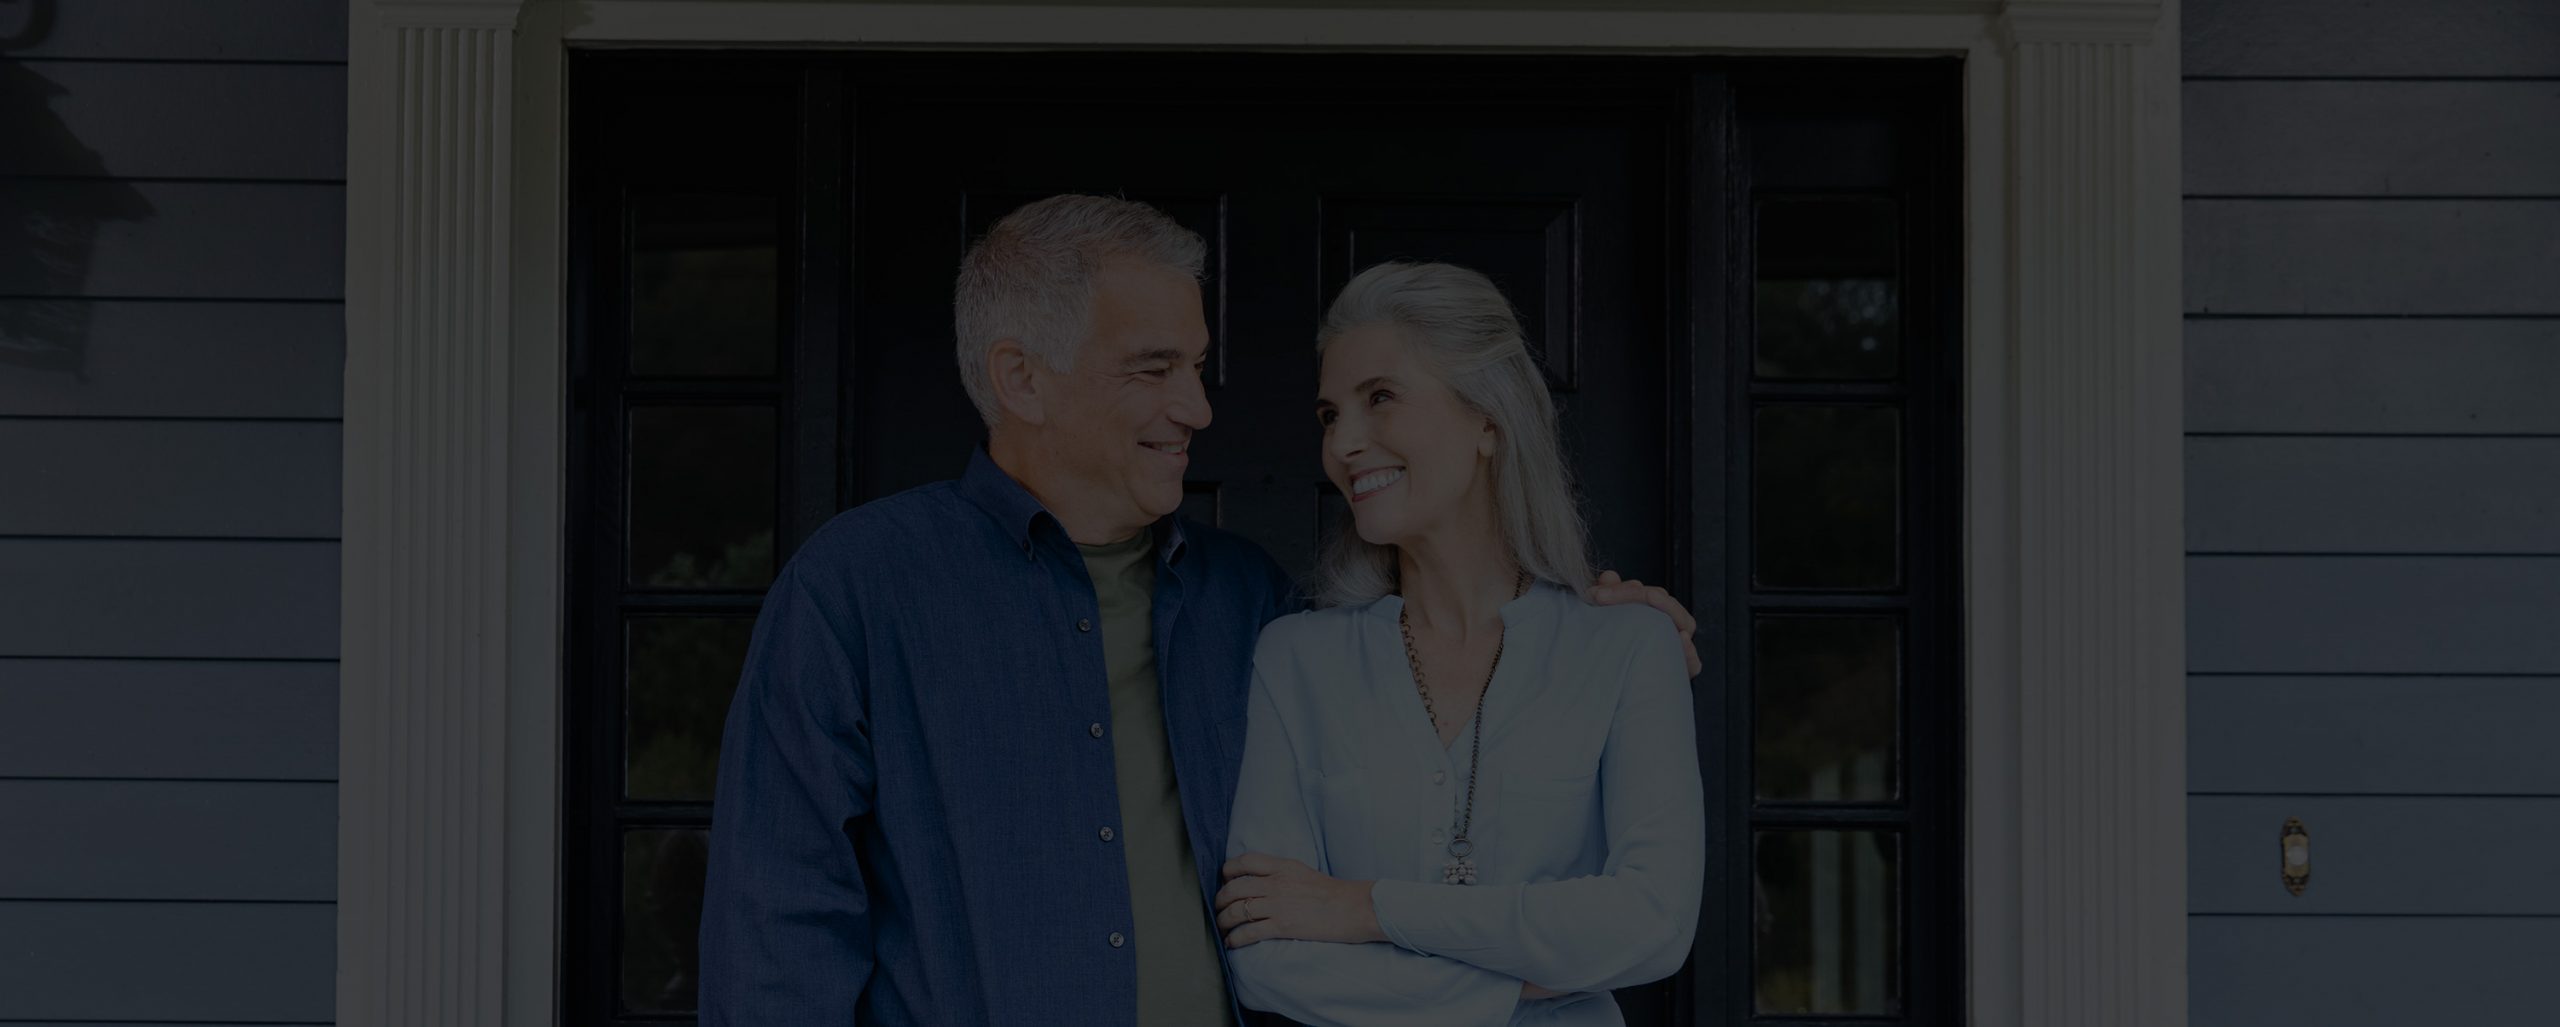 Older couple smiling at each other in front door of house